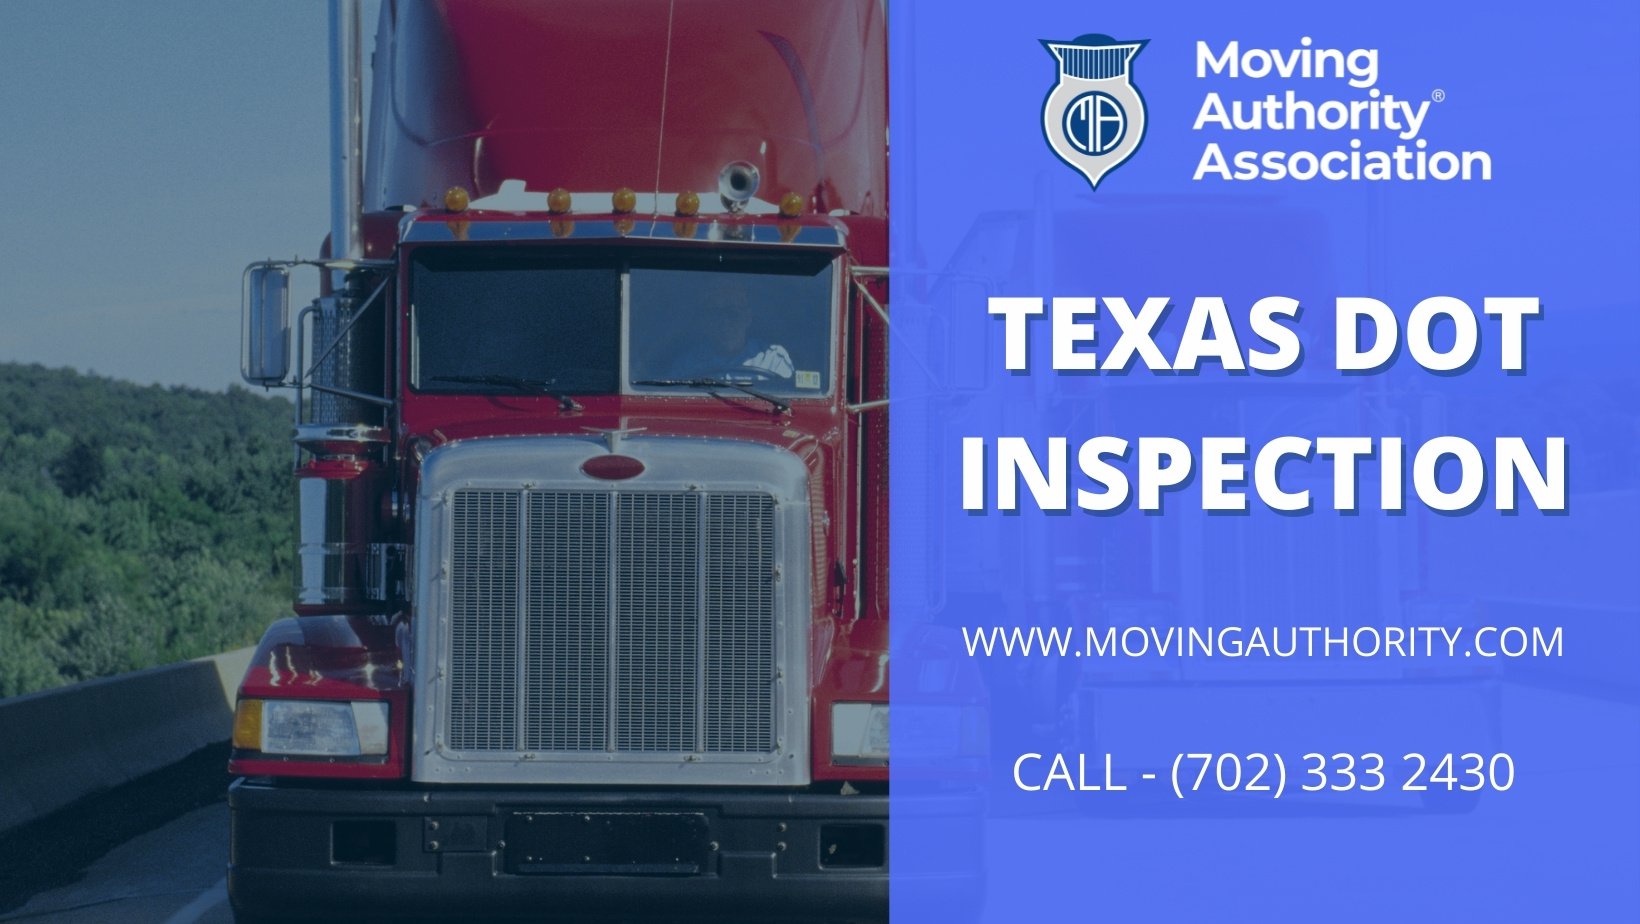 Texas DOT Inspection Moving Authority